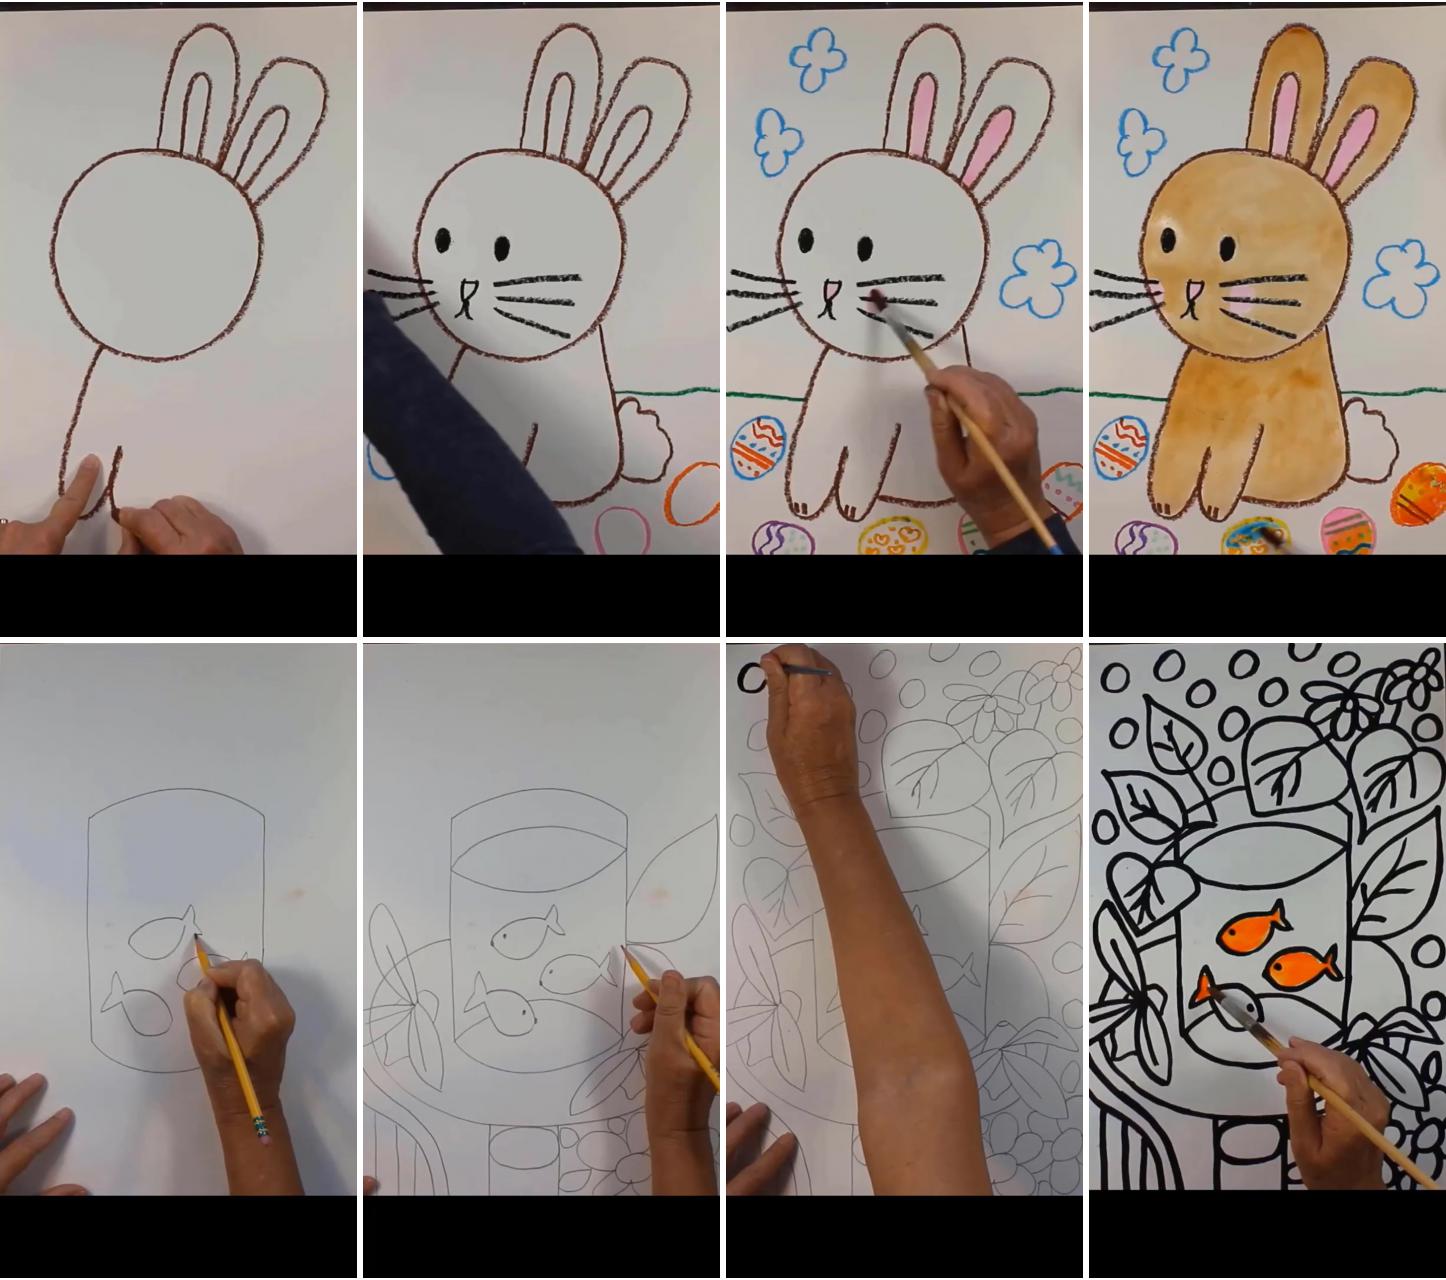 Easy & fun art project for kids: how to draw and watercolor paint the easter bunny & easter eggs | art projects for kids and beginners: inspired by famous artists matisse, kusama, and kandinsky